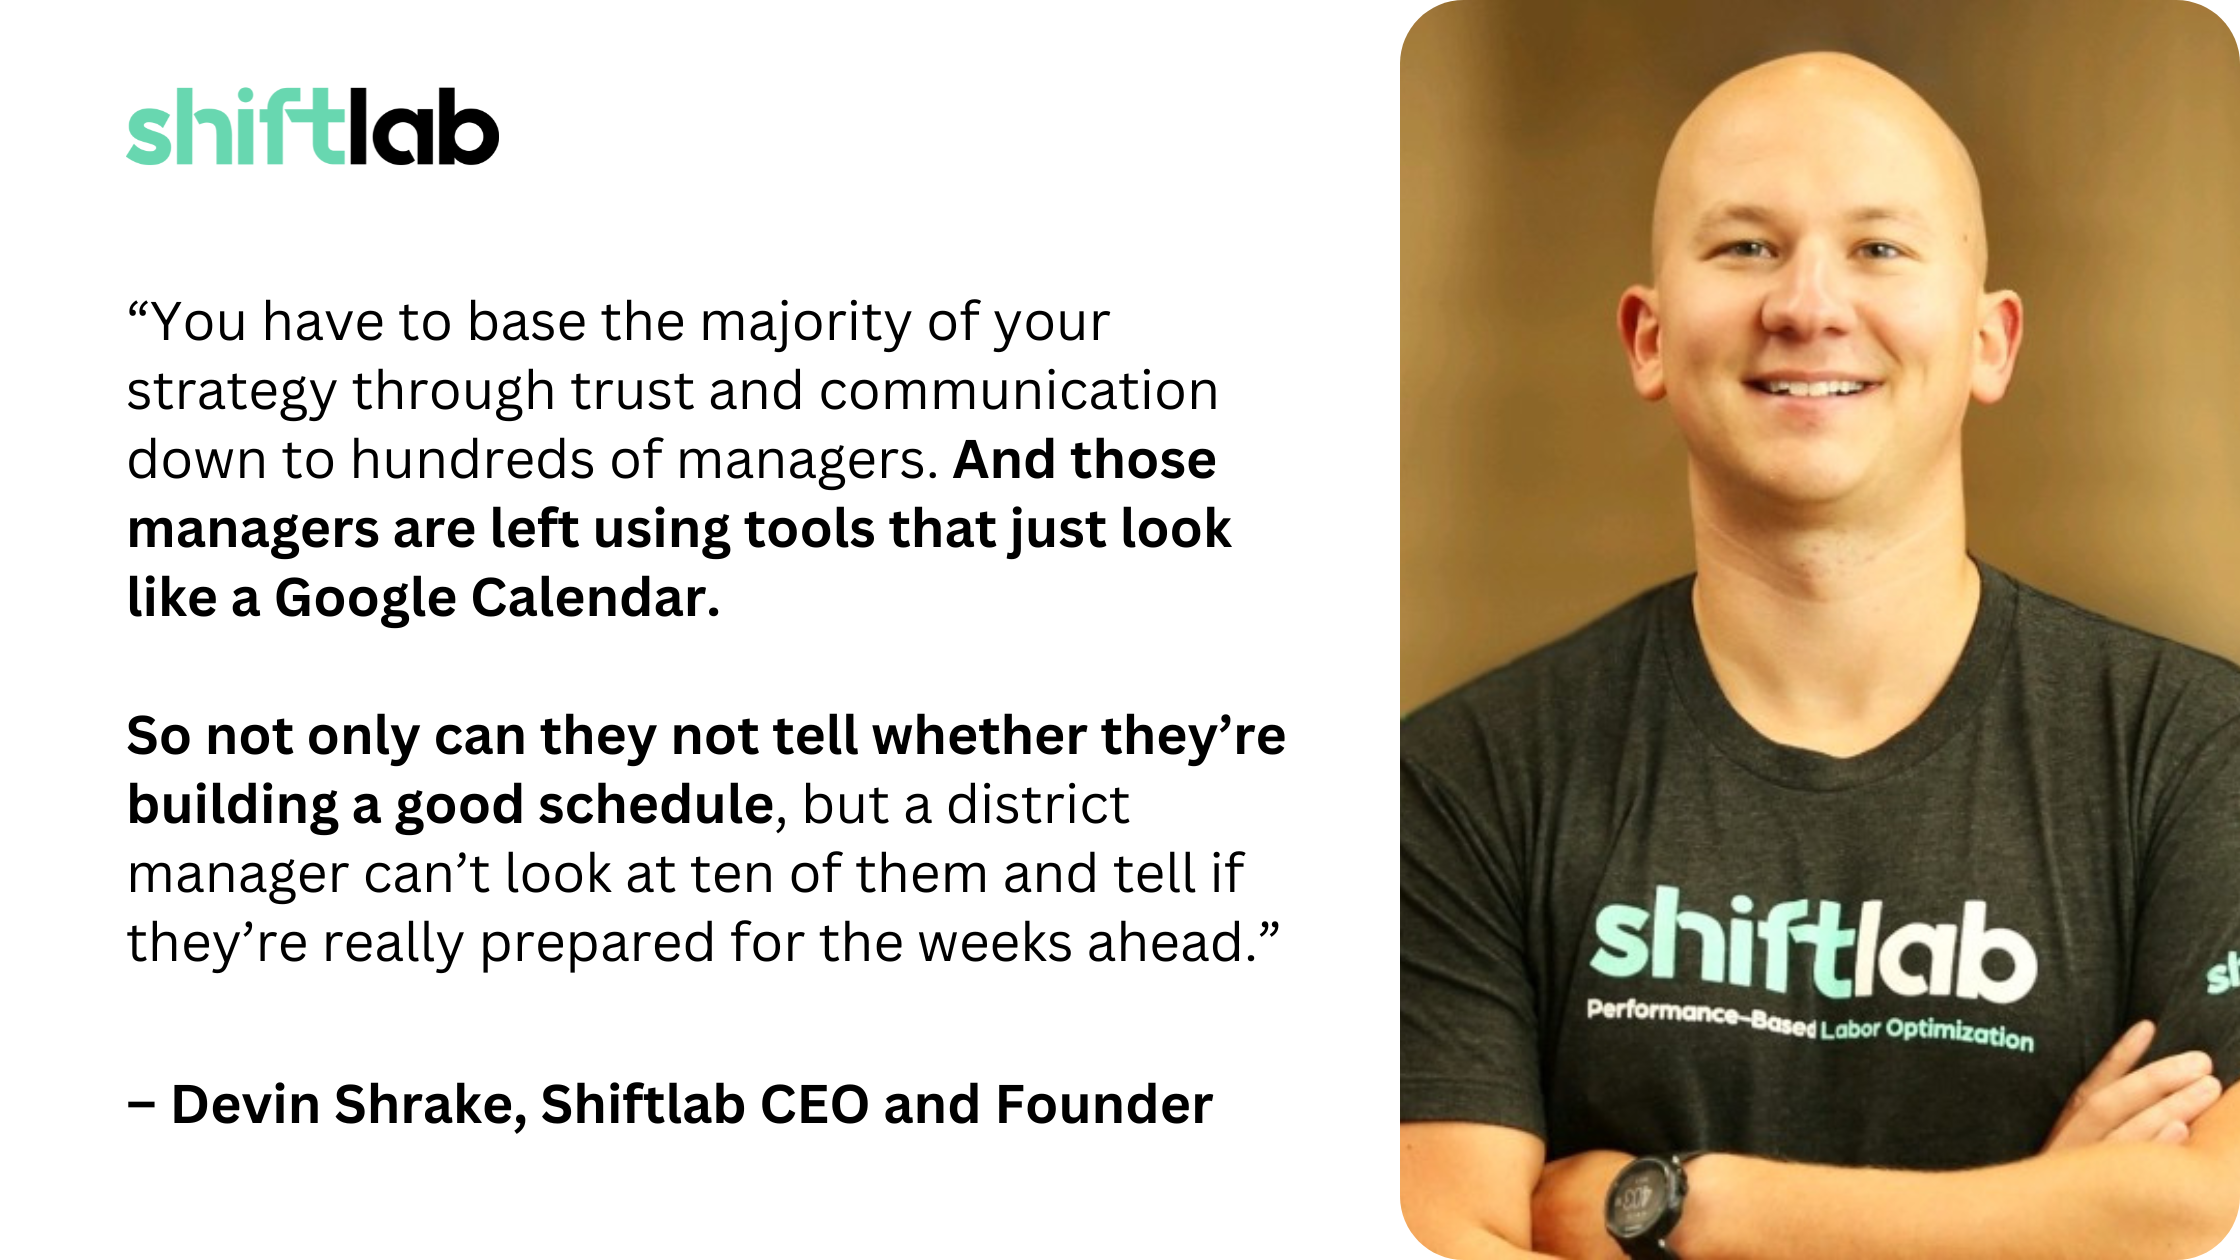 Quote from Devin Shrake, Shiftlab CEO & Founder